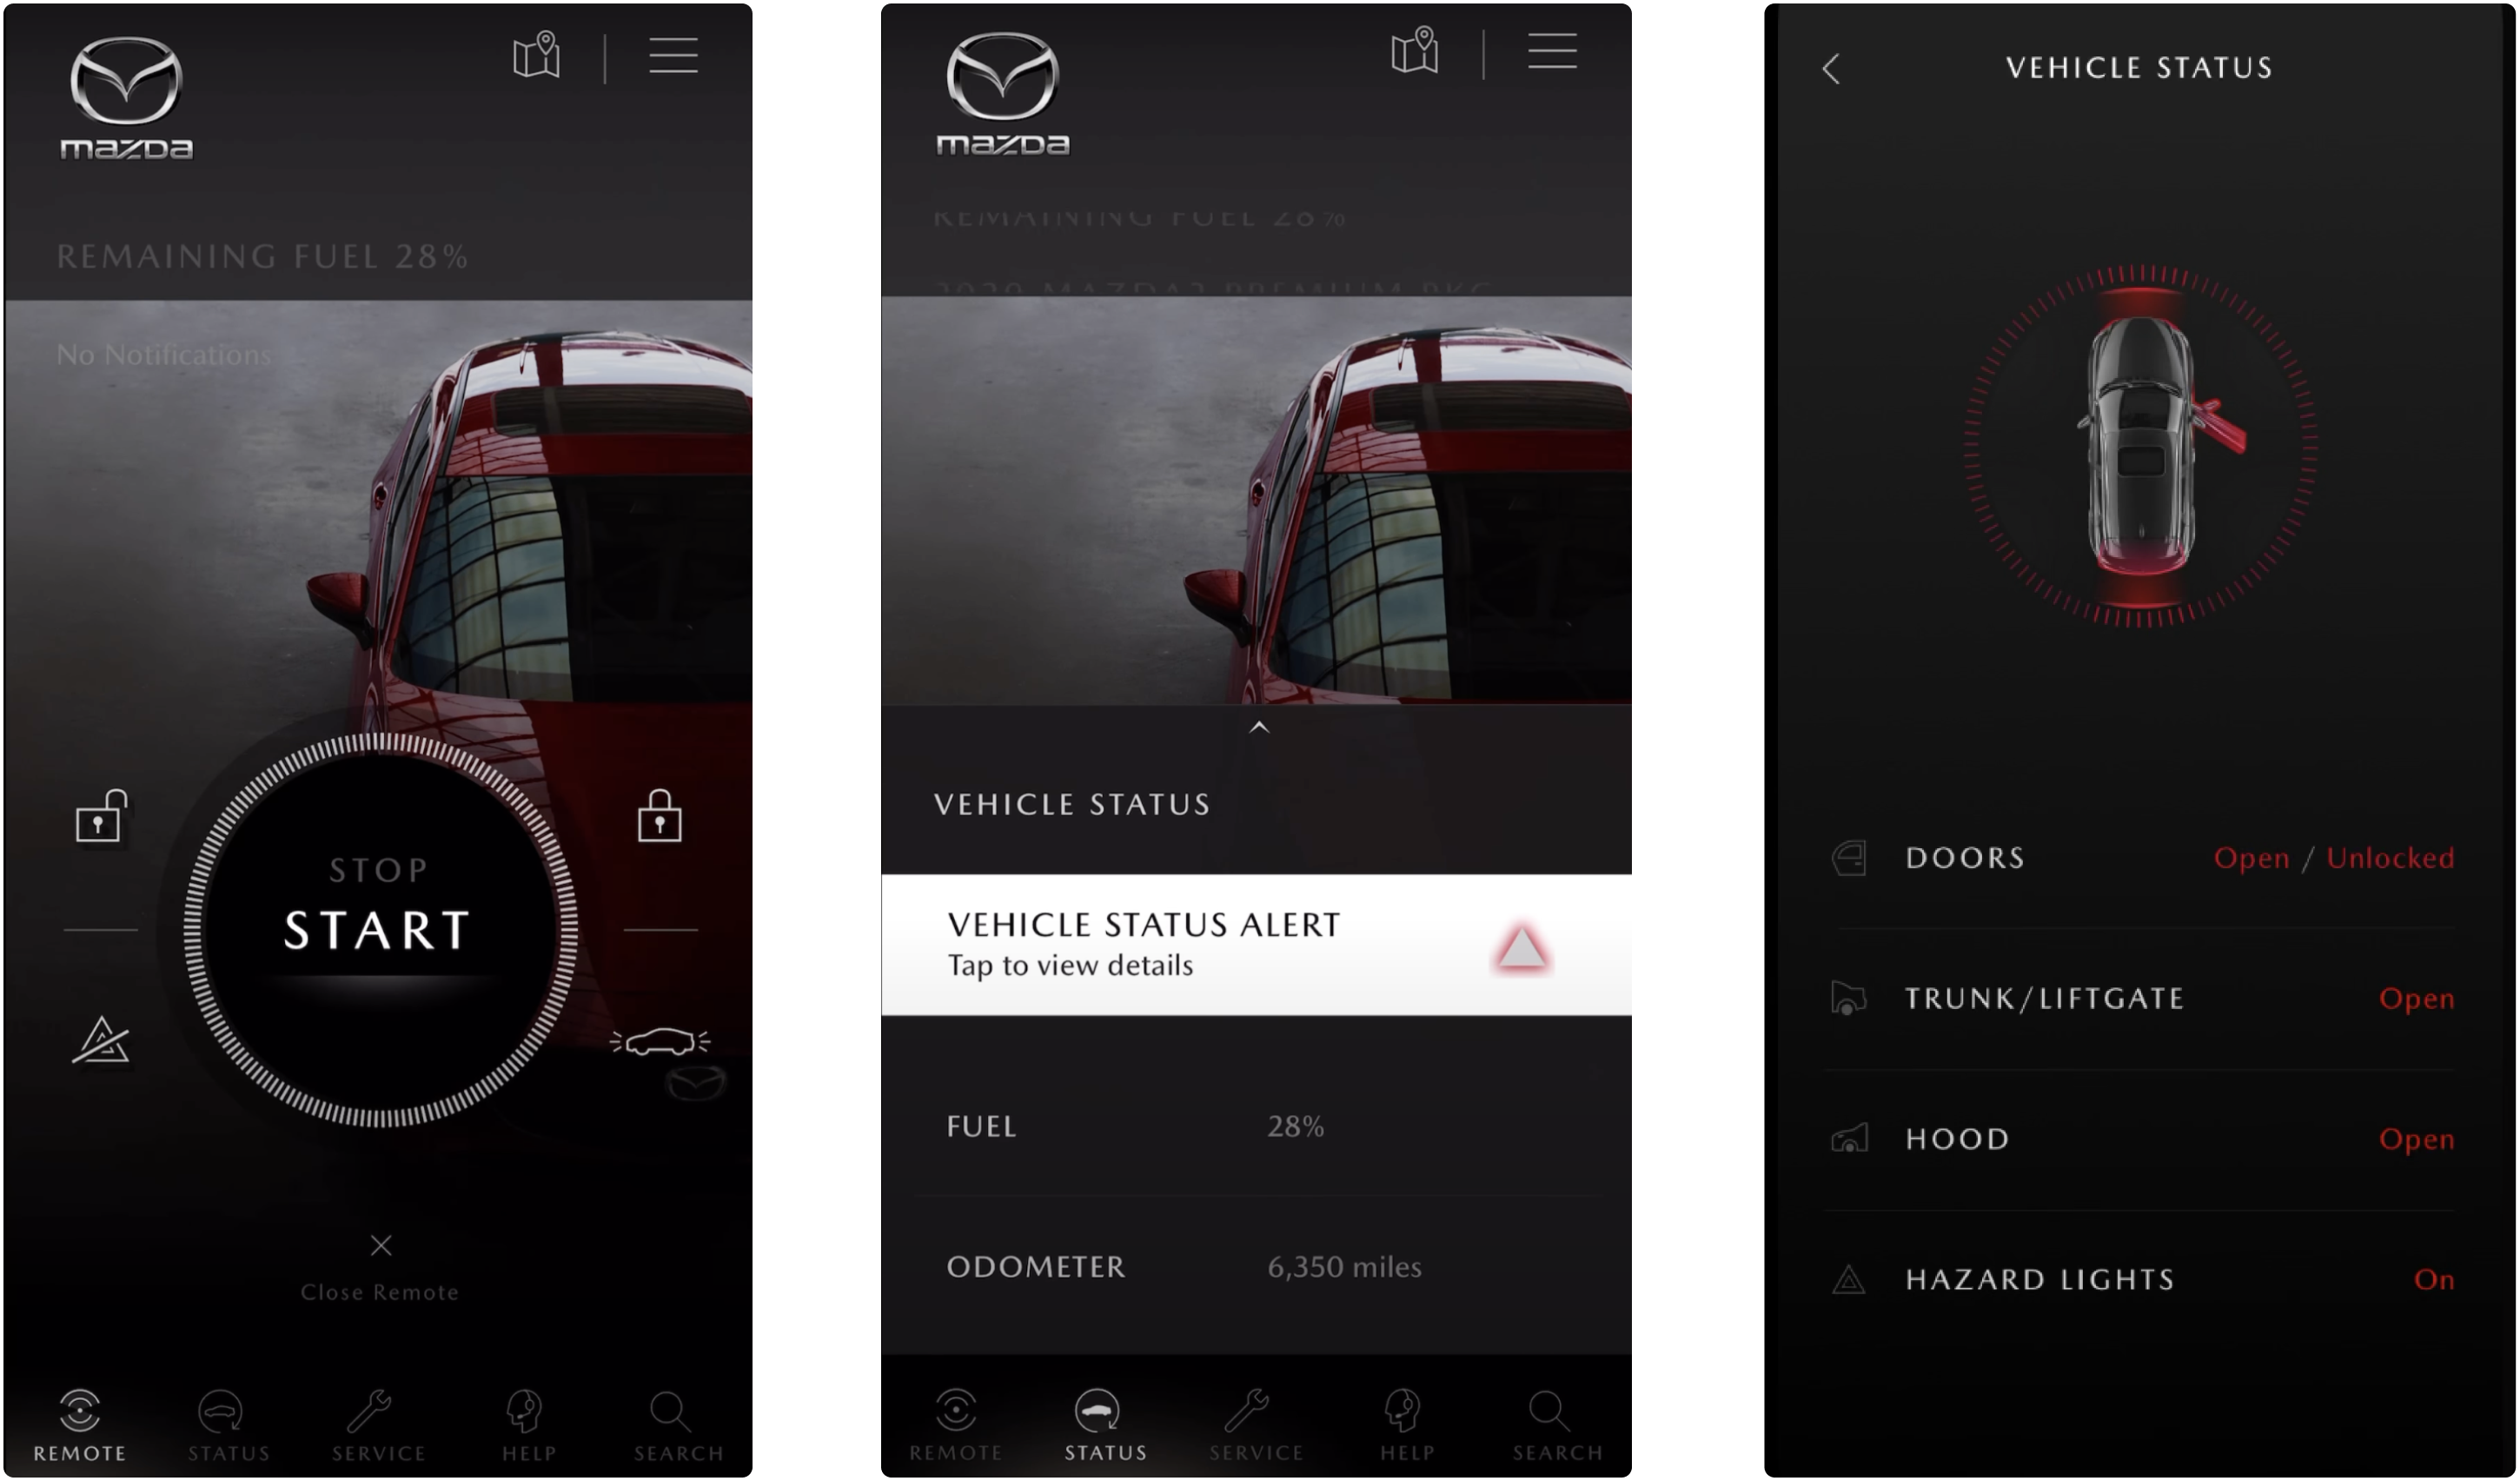 3 images of the current MyMazda App